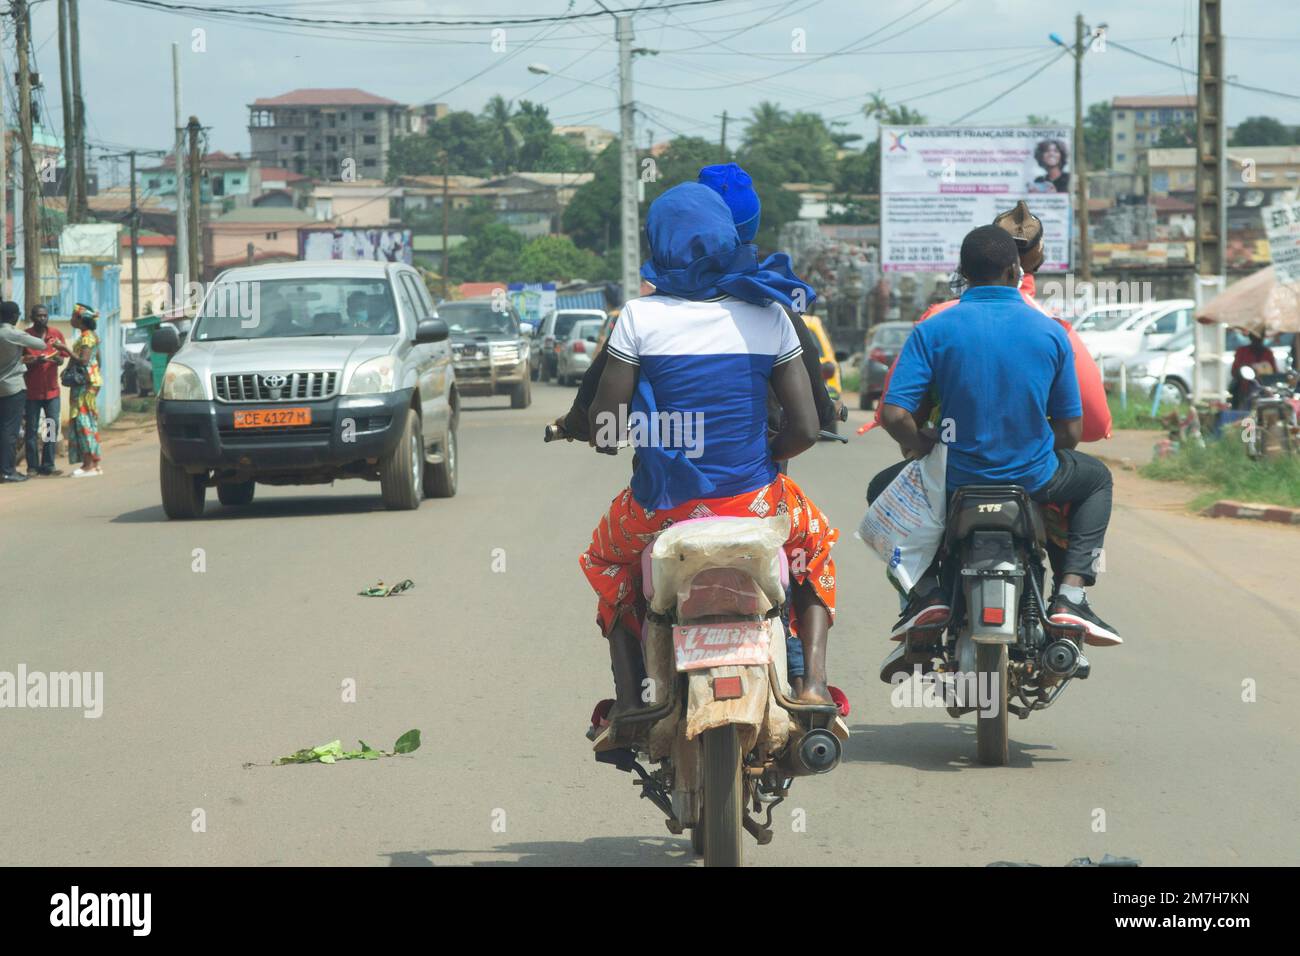 Motorcycle cabs or moto taxi seen from behind, carrying passengers in the streets of Yaounde in Cameroon Stock Photo